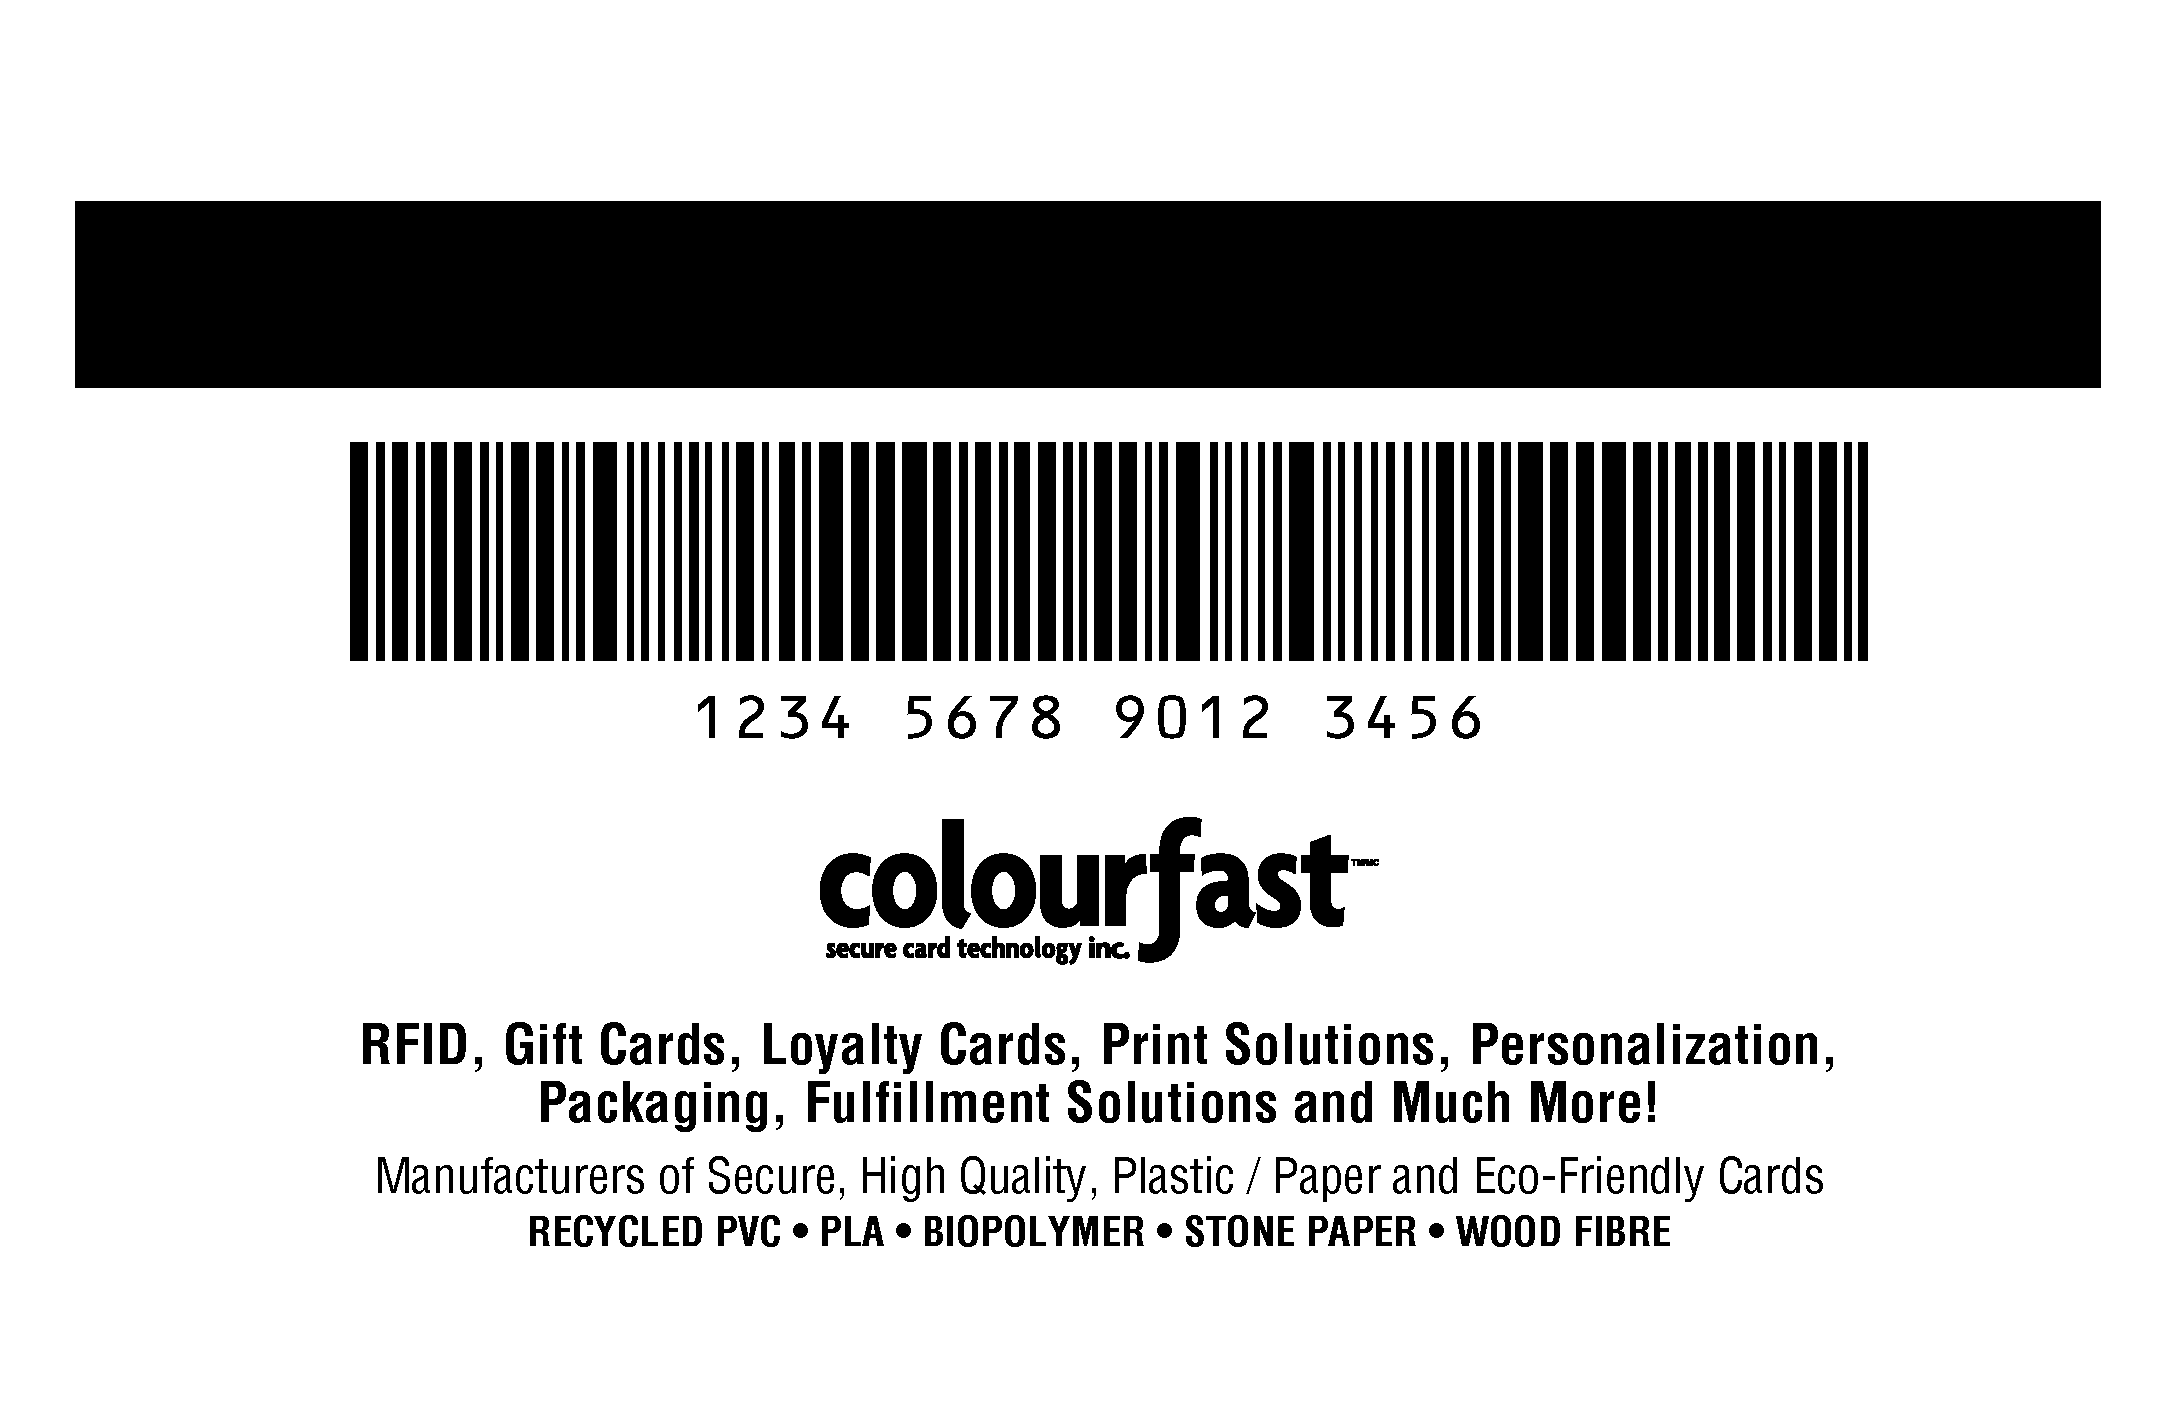 Image of Magnetic Stripe, Variable Barcode, Human-readable number